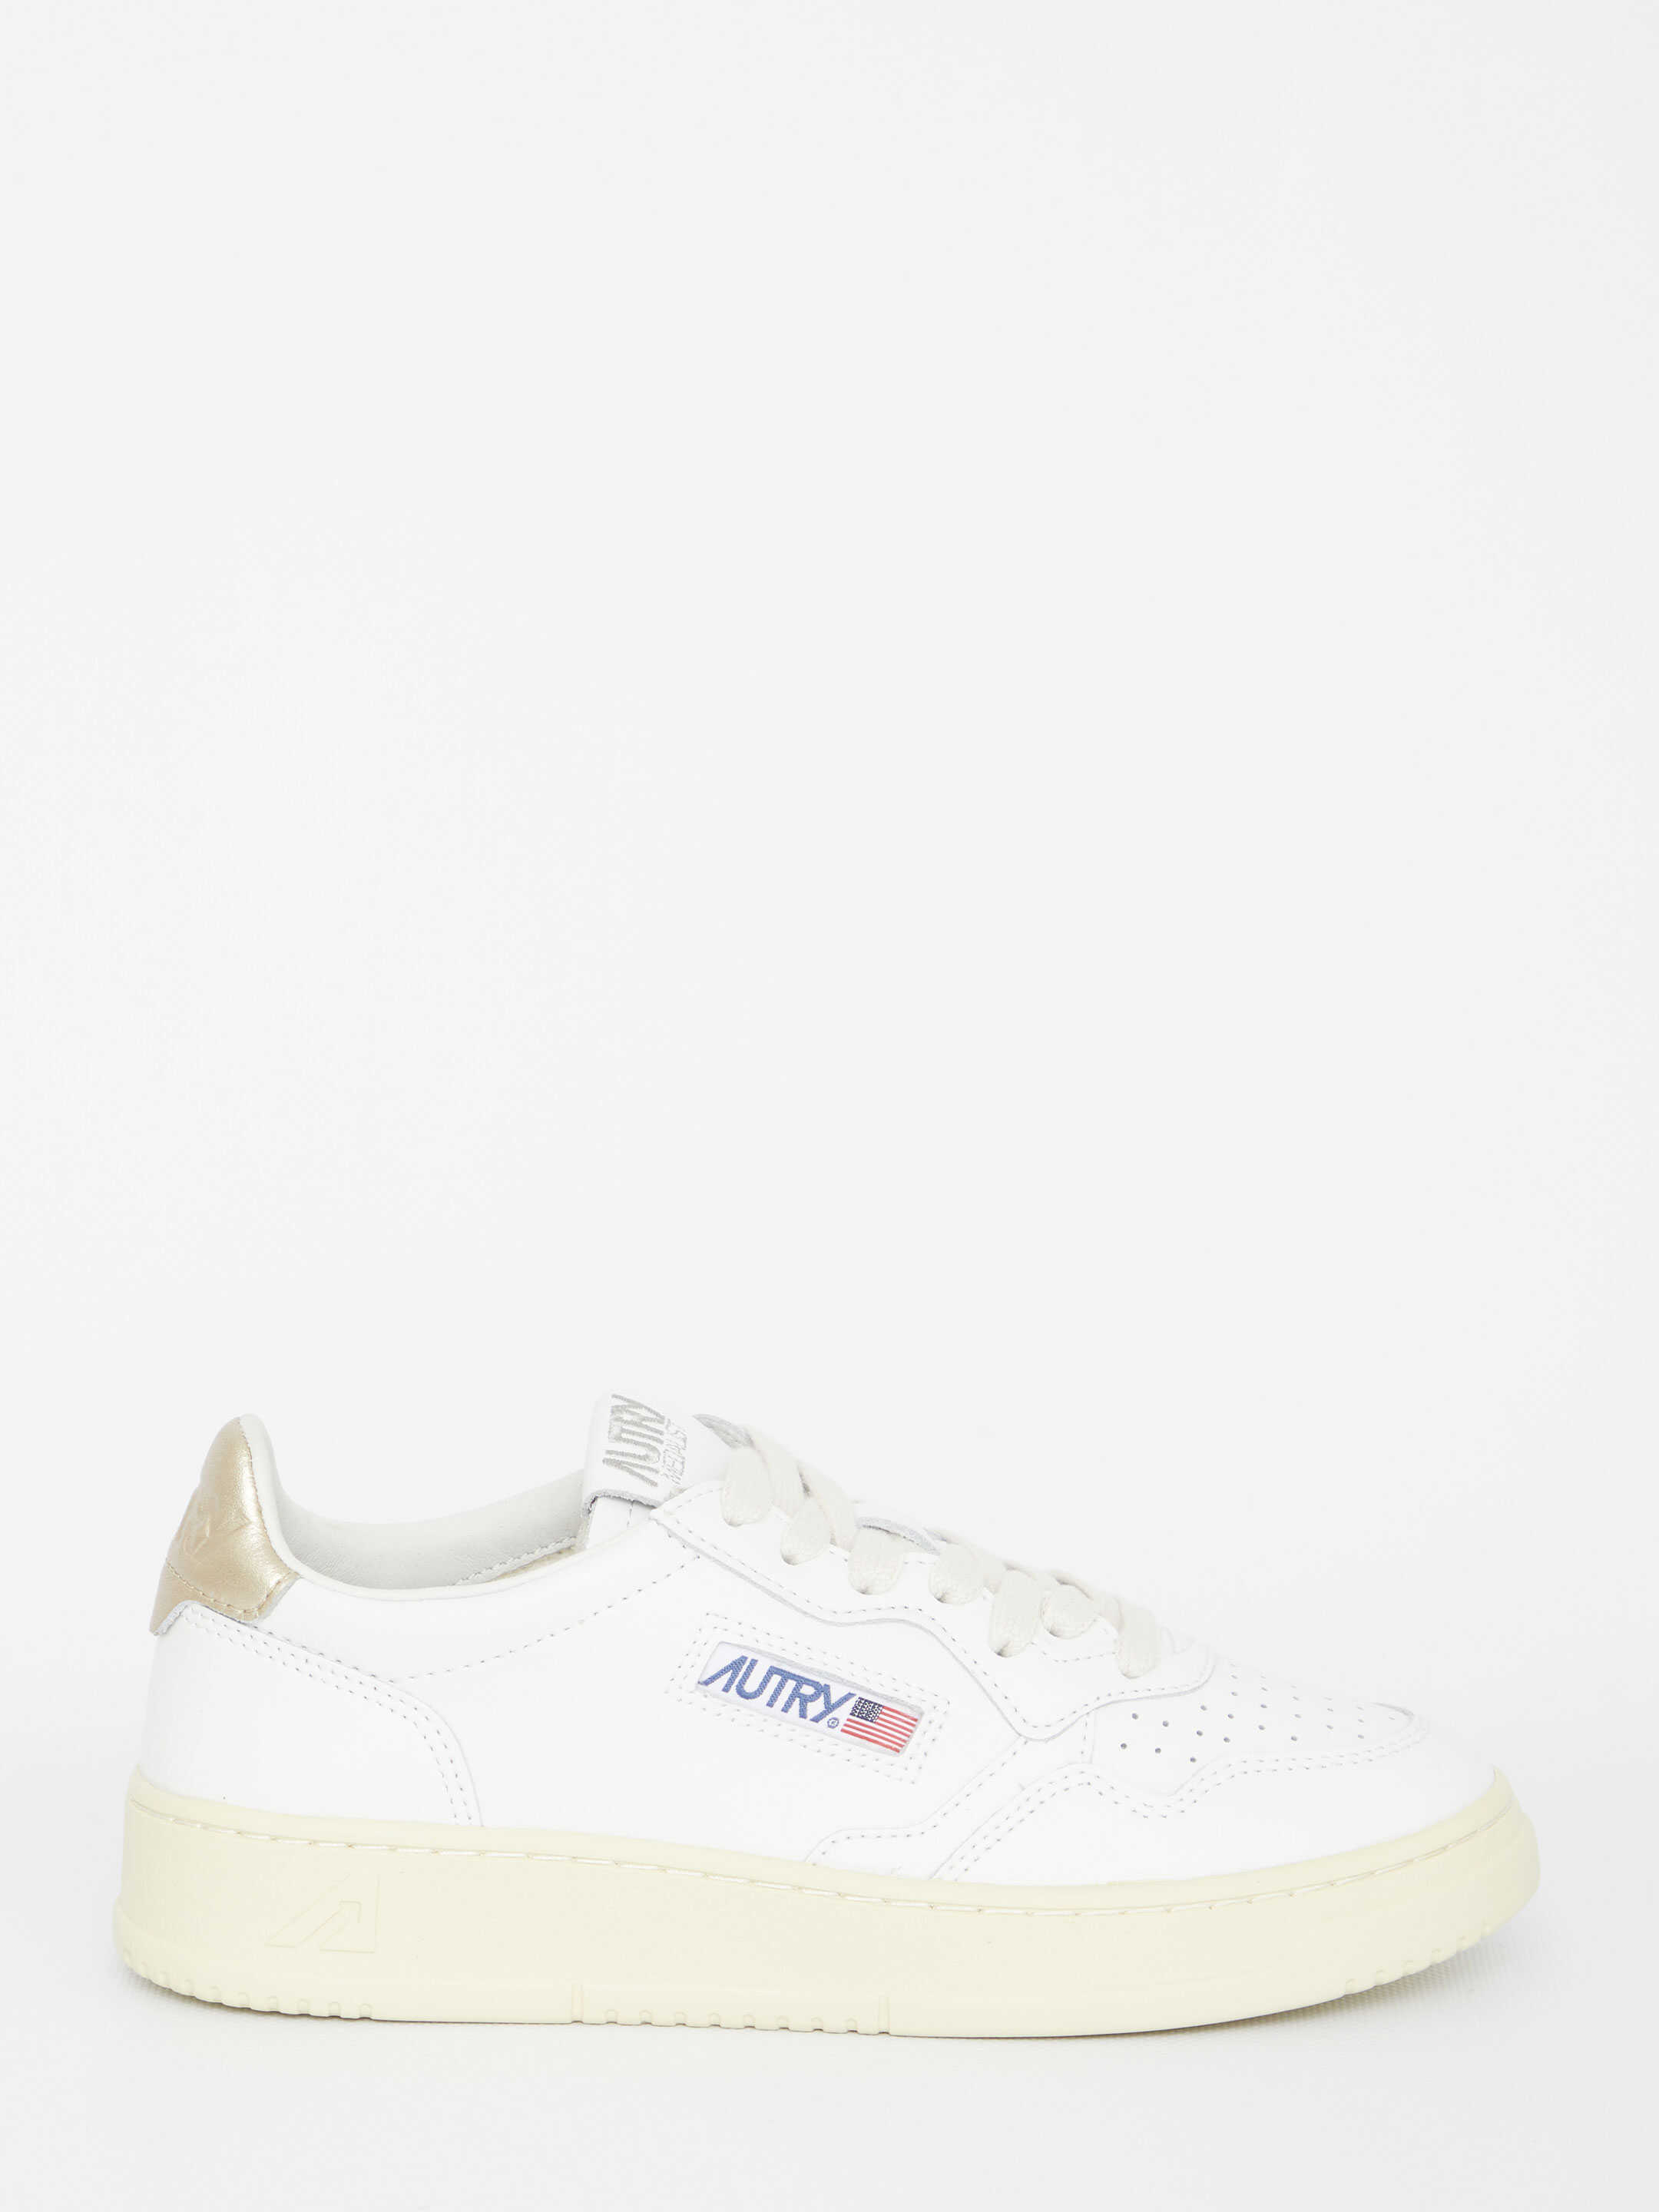 AUTRY Medalist And Gold Sneakers WHITE